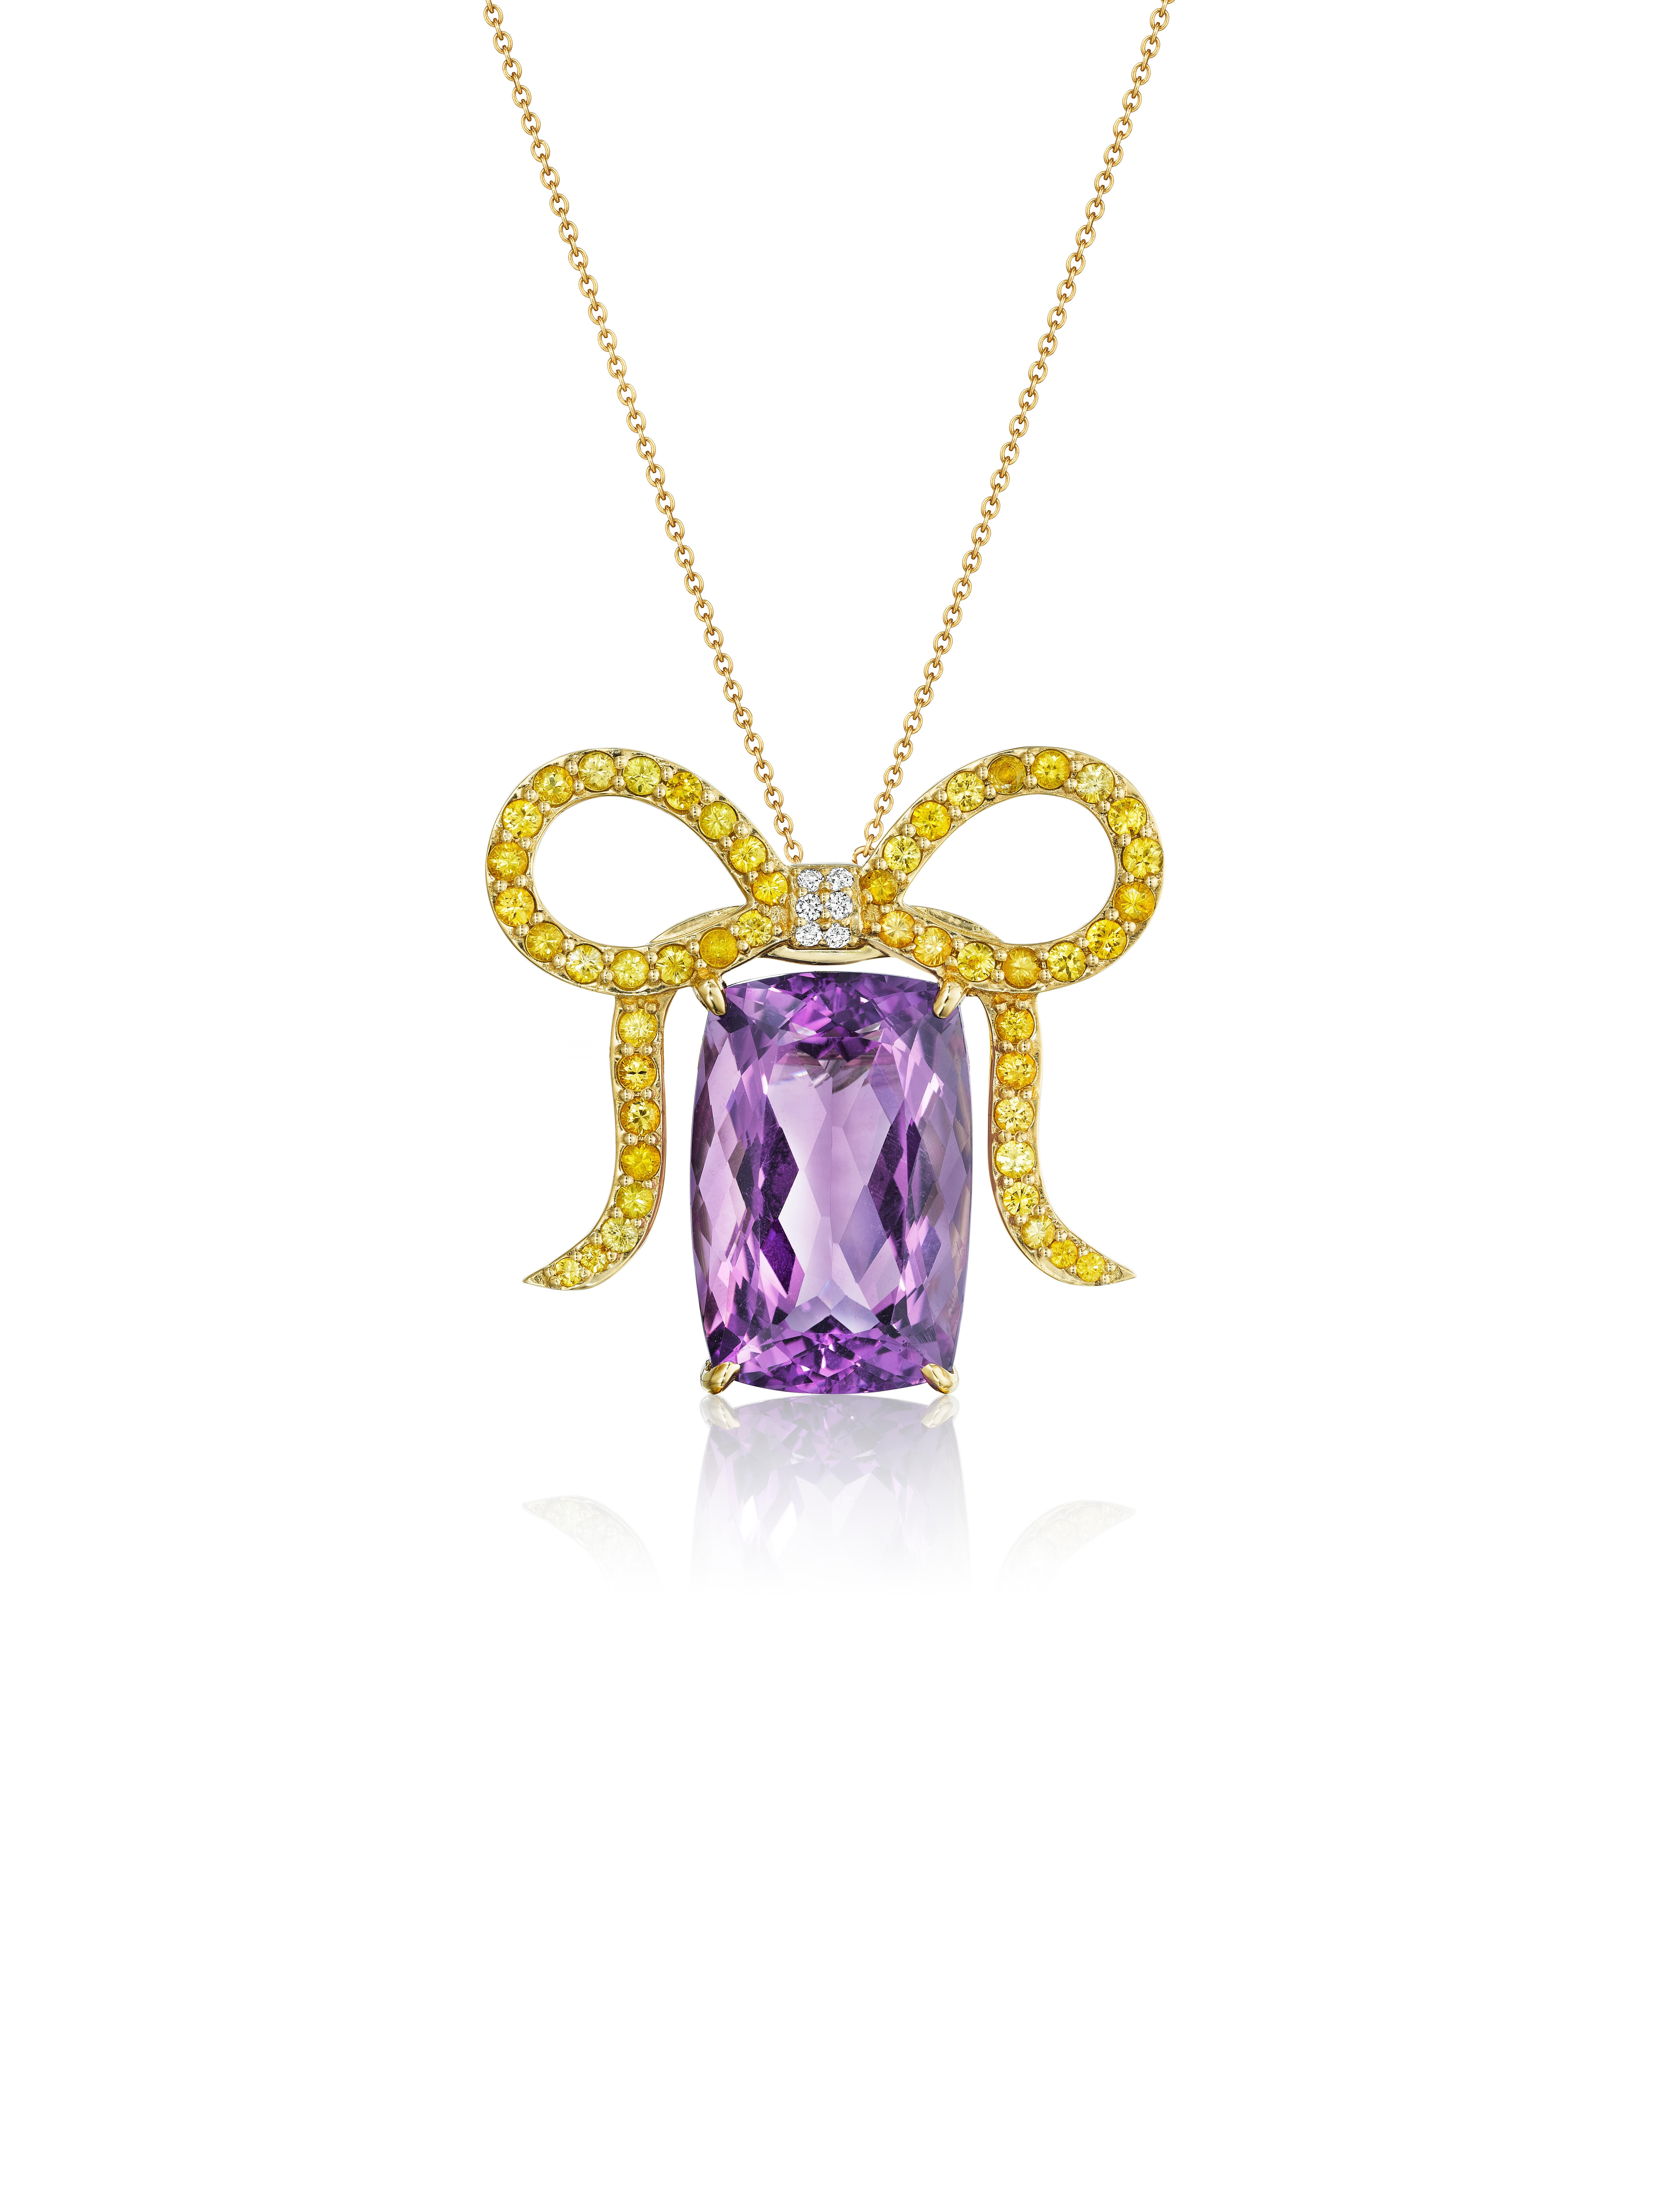 One-of-a-kind 18 karat gold ribbon tied large Amethyst rectangular cushion-cut convertible Brooach-Pendant YOKI Design - can be worn as a brooch or a pendant on a short or long chain. Piece features Amethyst, Yellow Sapphires, and Diamonds set in